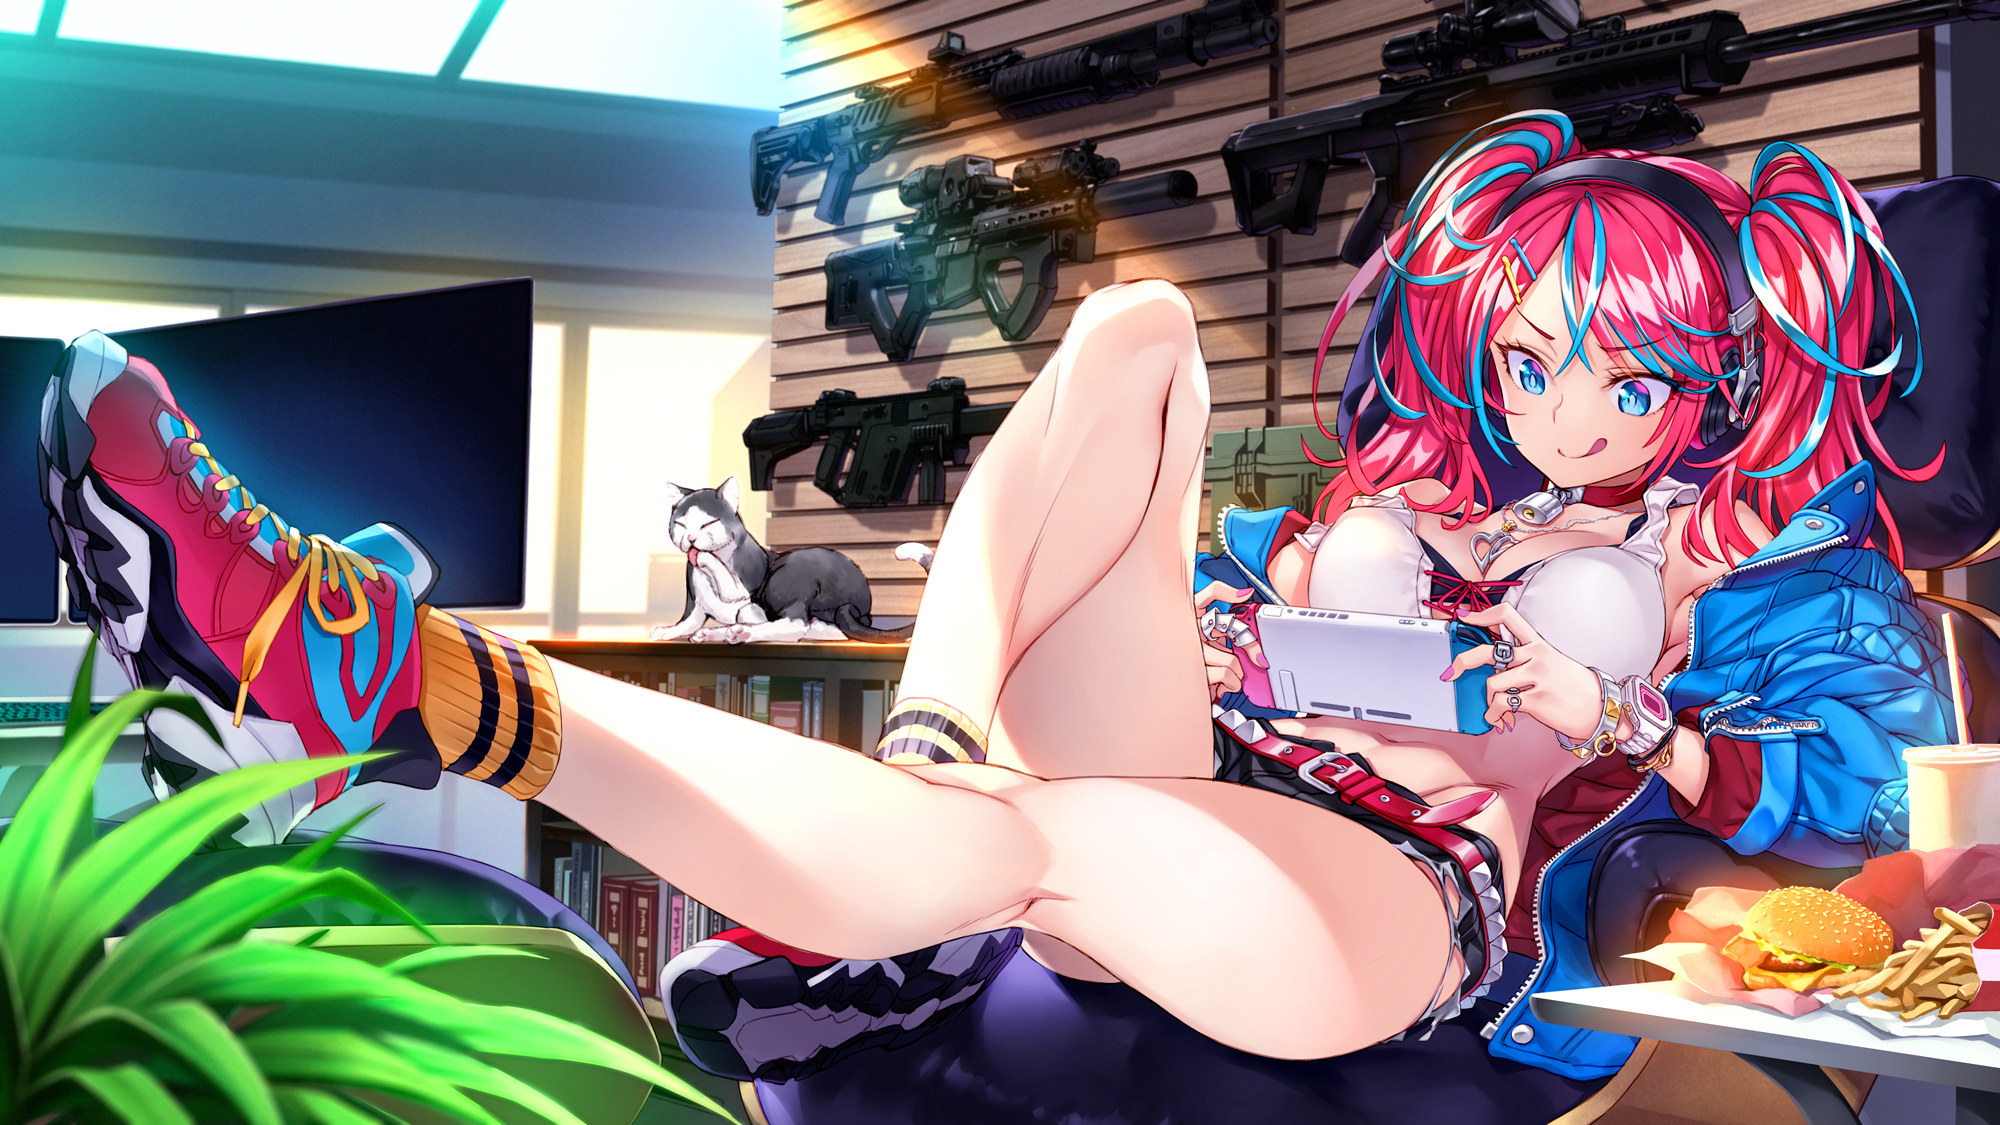 Anime 2000x1125 anime girls original characters gun cats open jacket cleavage redhead blue eyes tongue out Matsuryuu colorful legs belly bra tongues anime